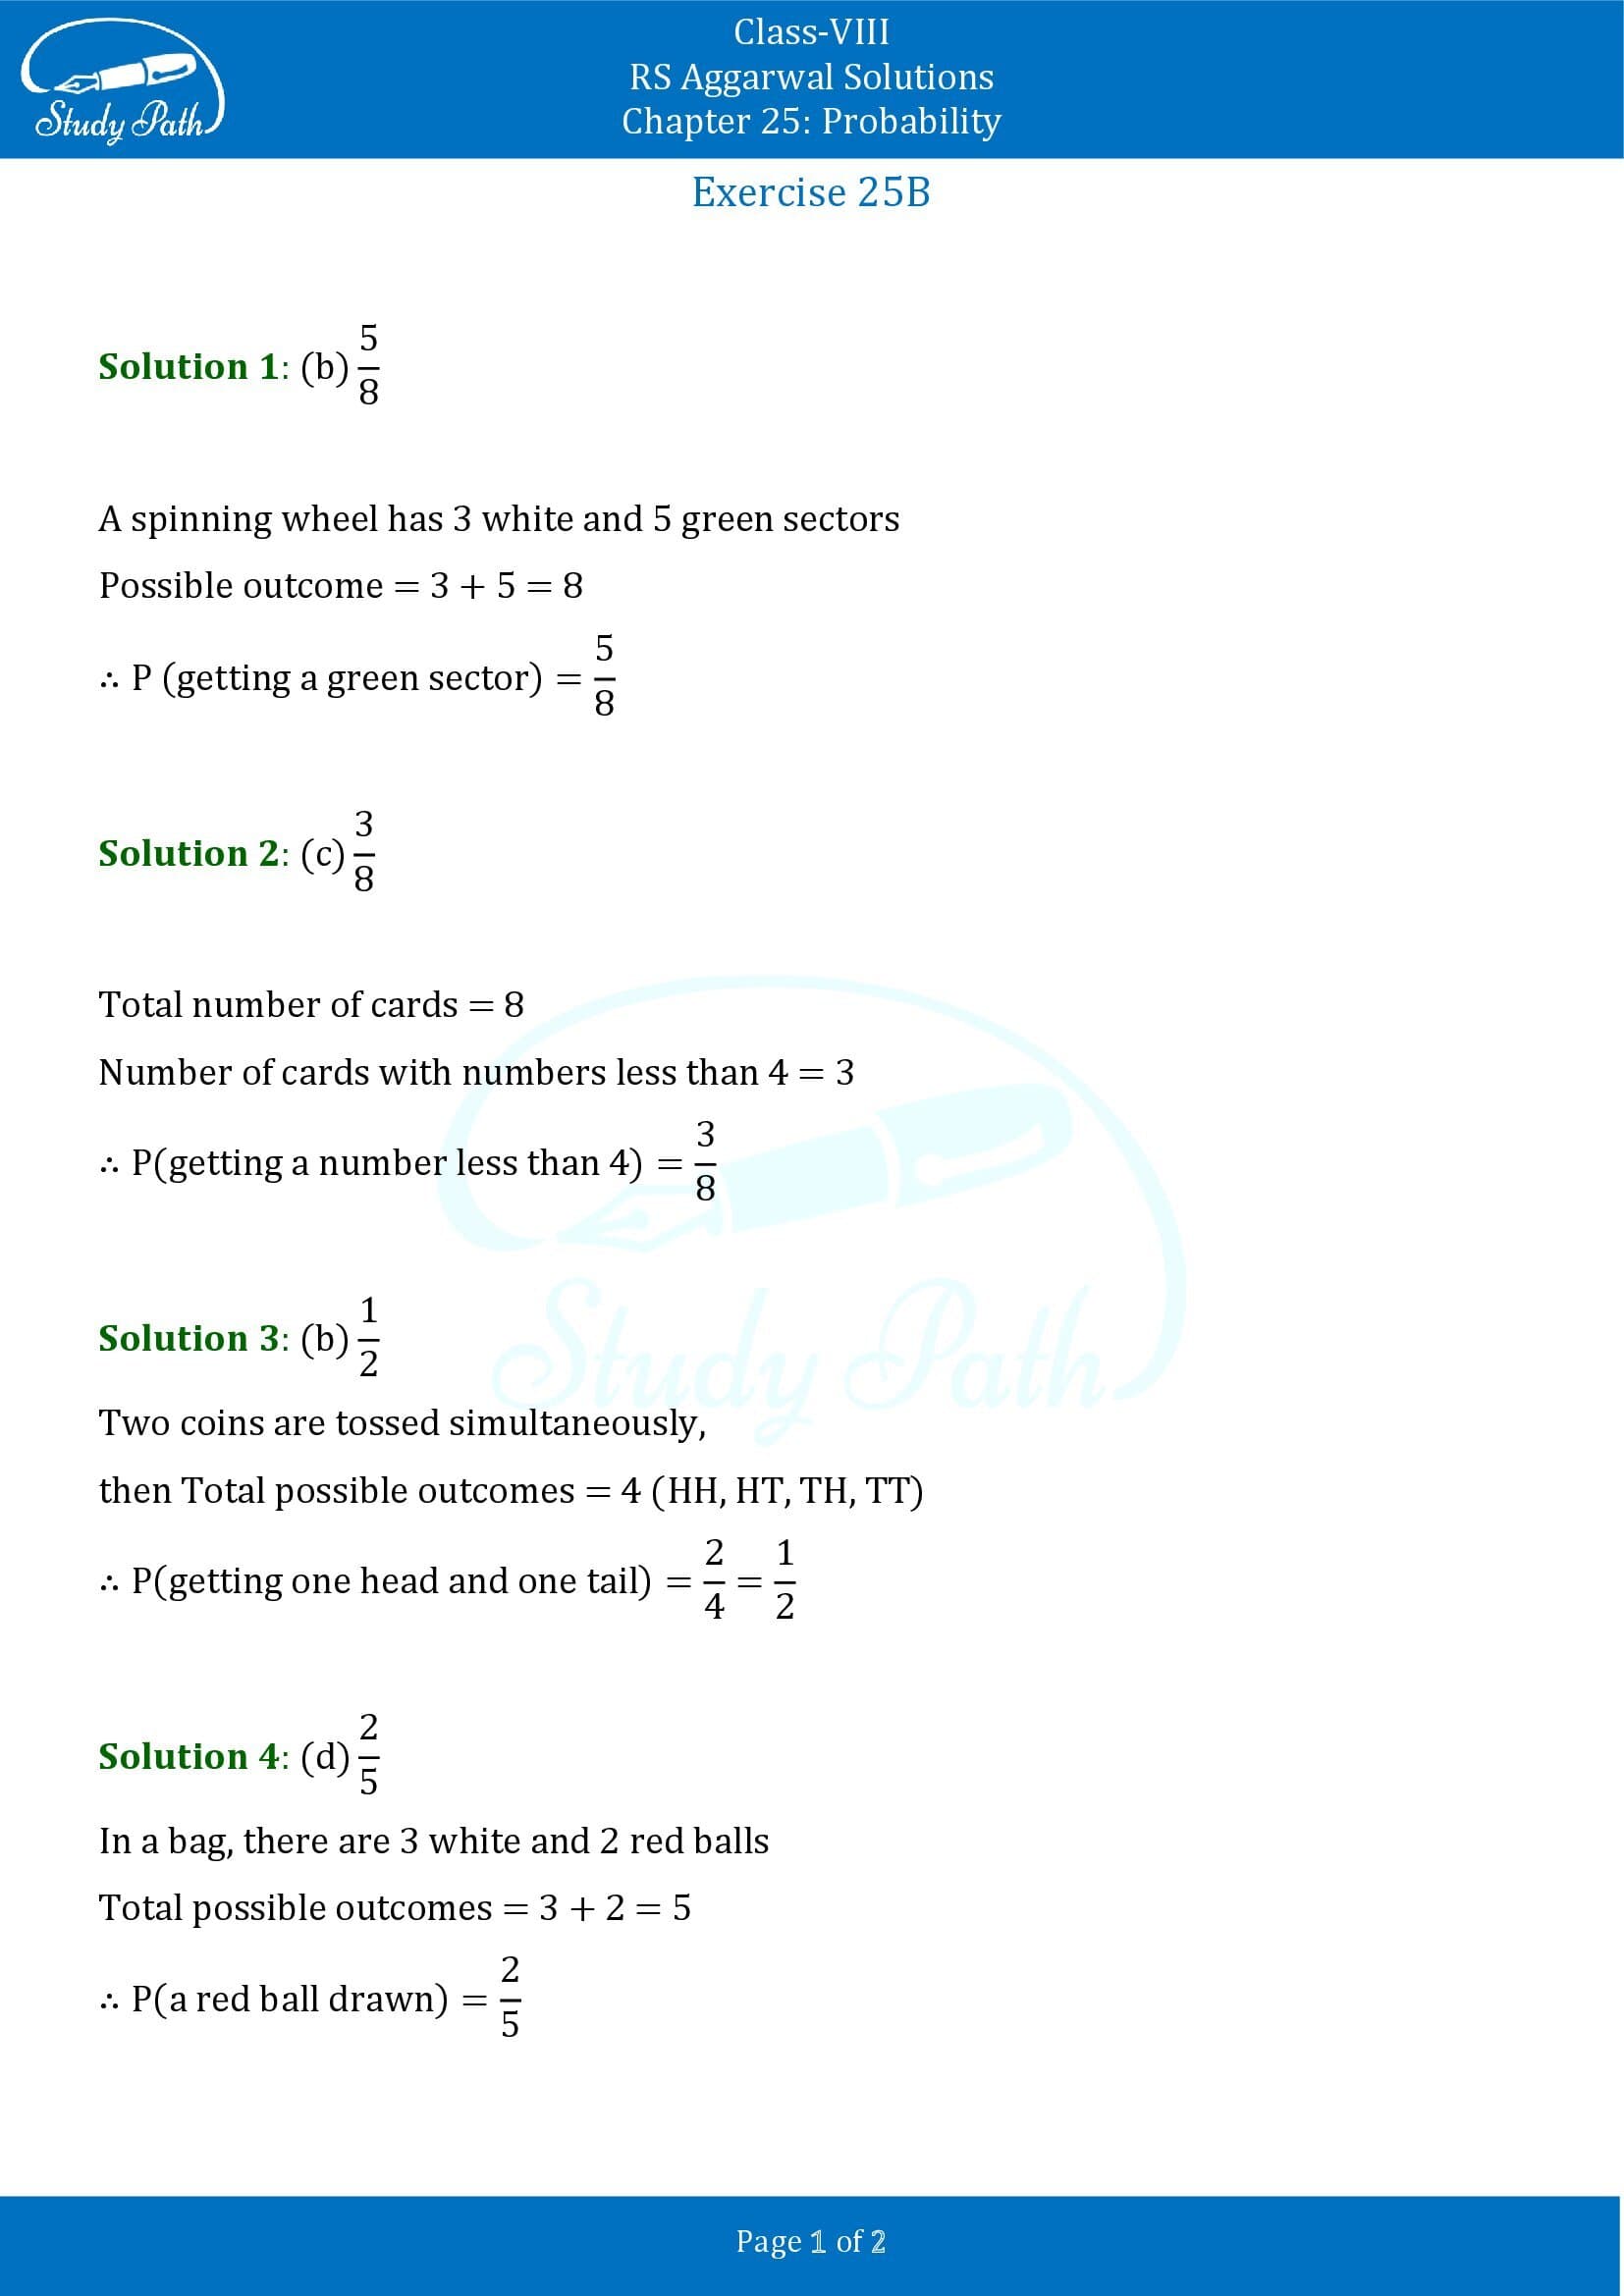 RS Aggarwal Solutions Class 8 Chapter 25 Probability Exercise 25B MCQs 00001